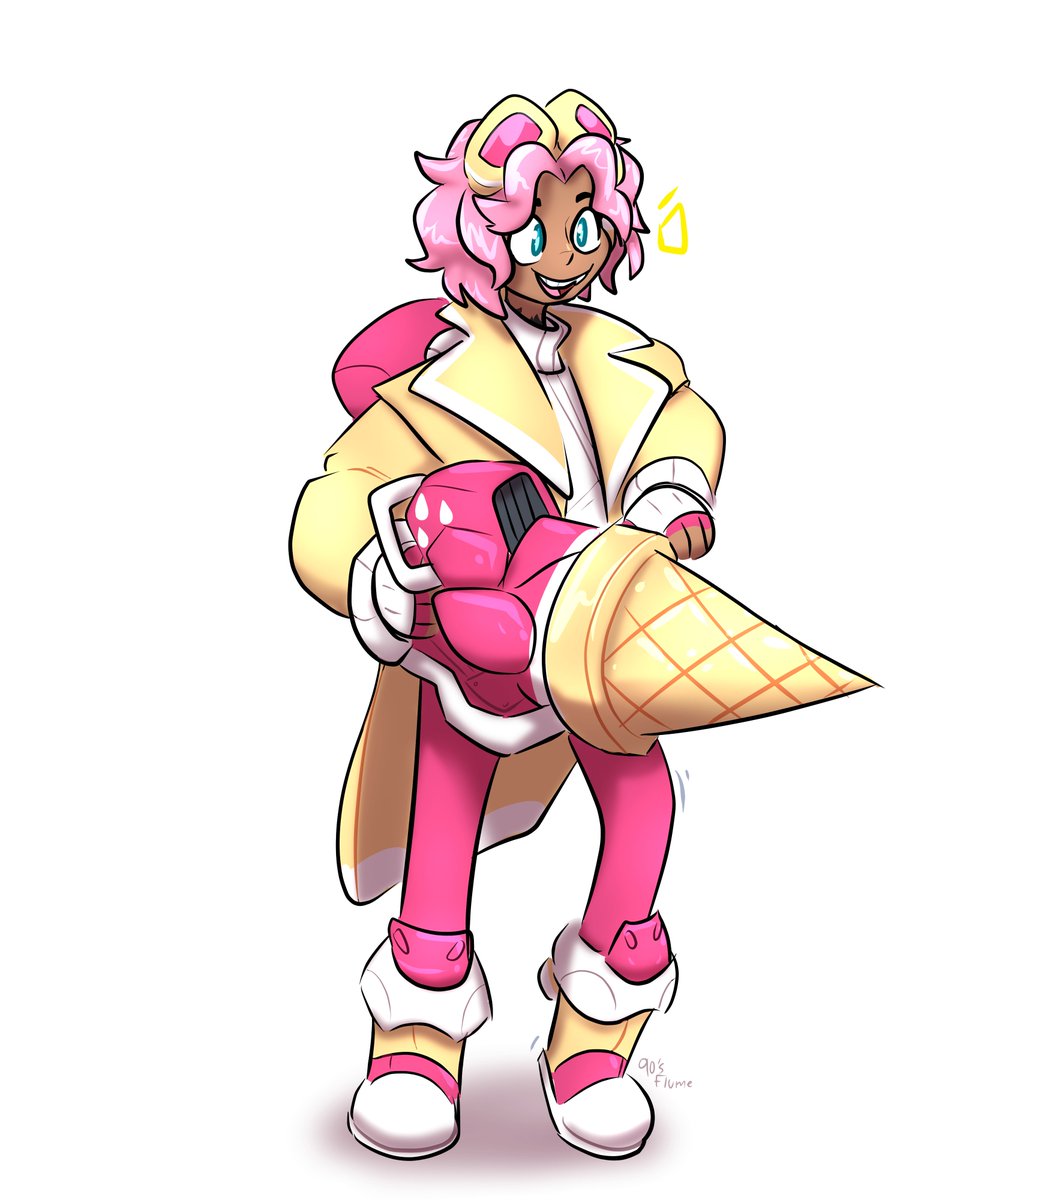 So..
Guess which two characters have the same voice actor?

#strawberrycrepecookie #Venture #crk #cookierunkingdom  #Overwatch #ow2